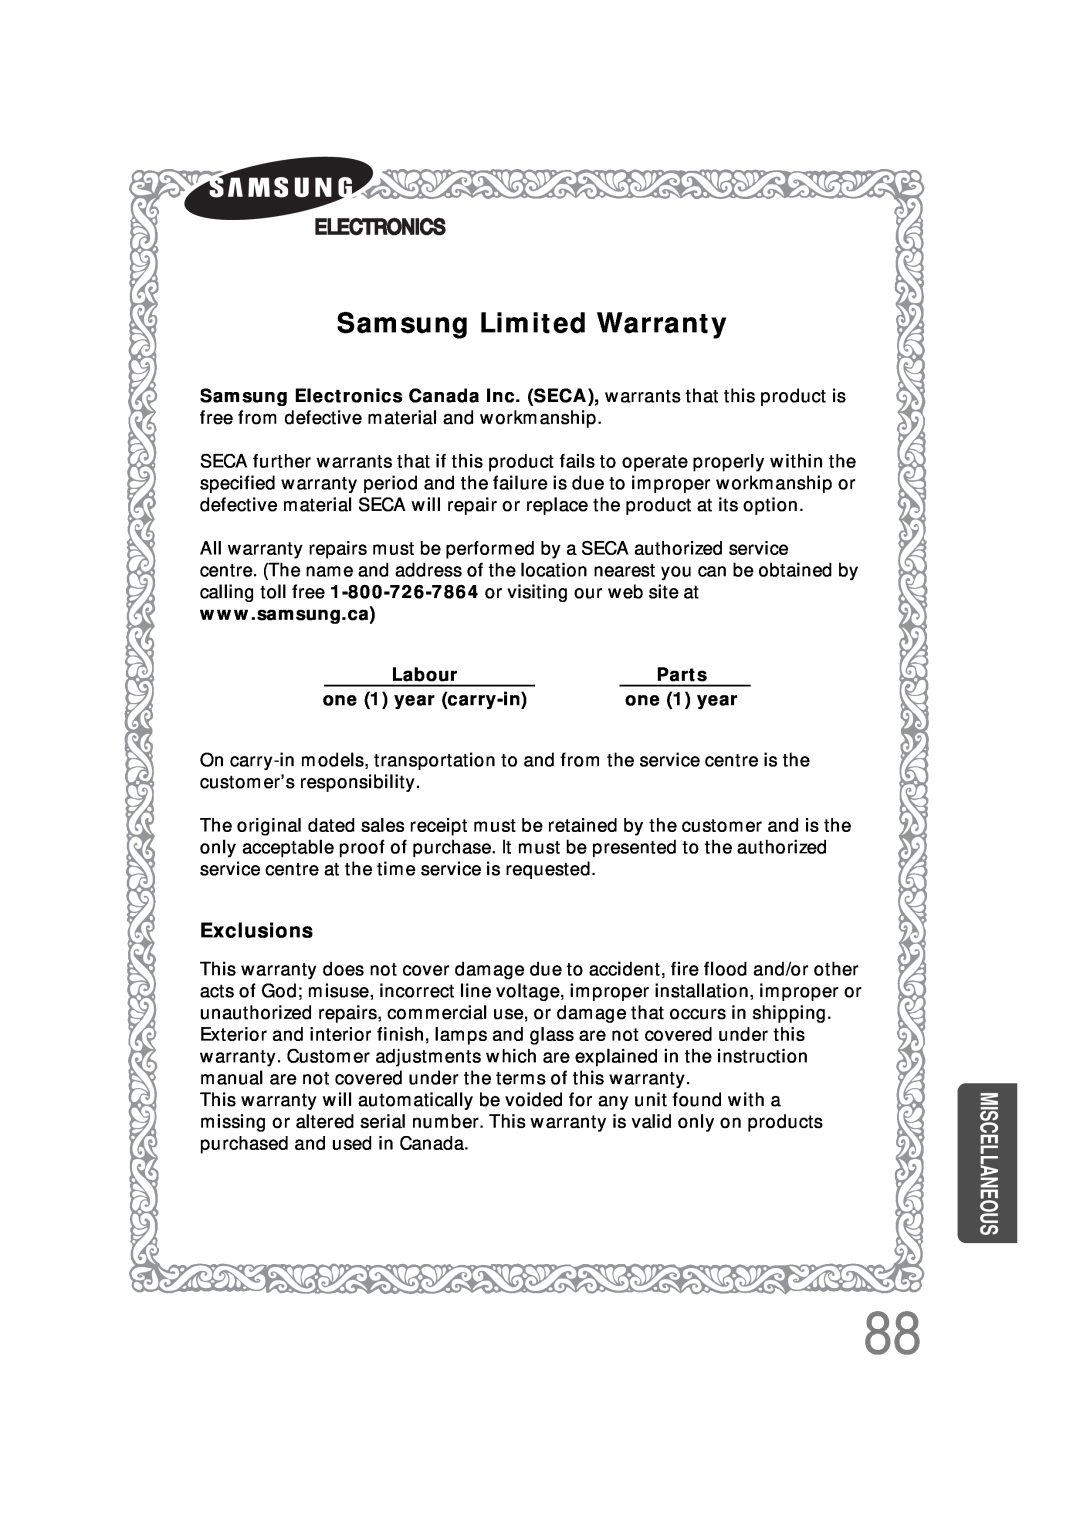 Samsung AH68-01493X, HT-DS665T, 20051111115925328 Samsung Limited Warranty, Exclusions, Labour, Parts, one 1 year carry-in 